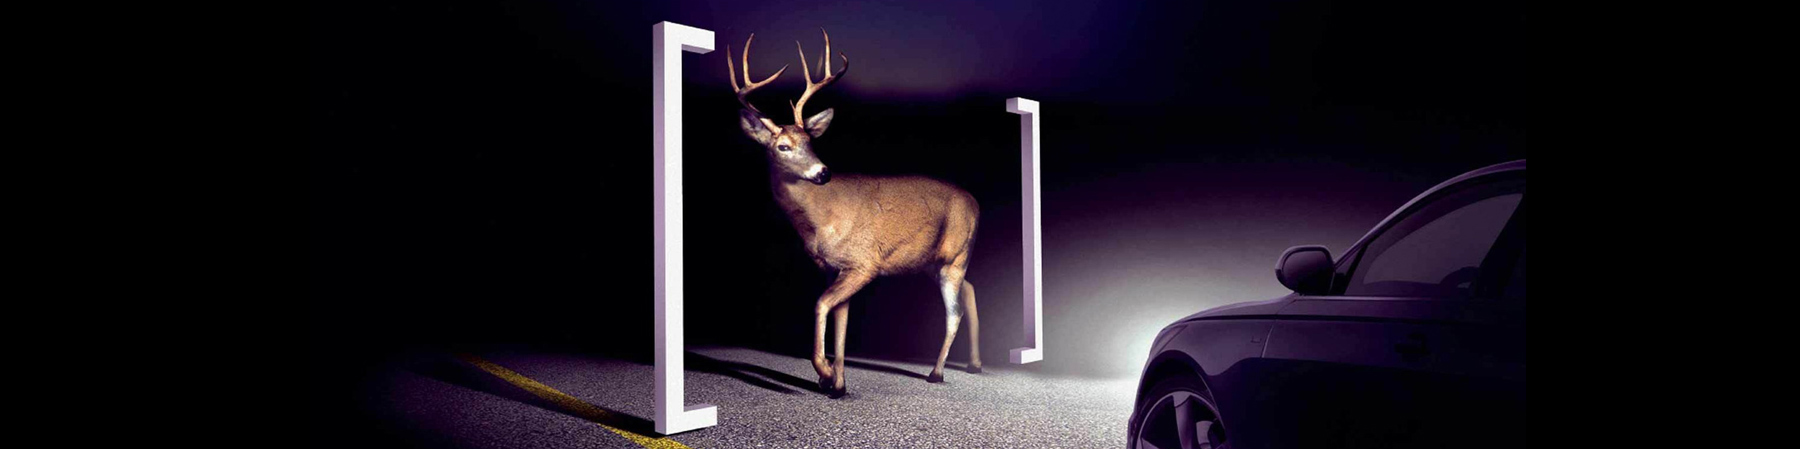 Thermal sensing on a vehicle picking up a deer on the road at night